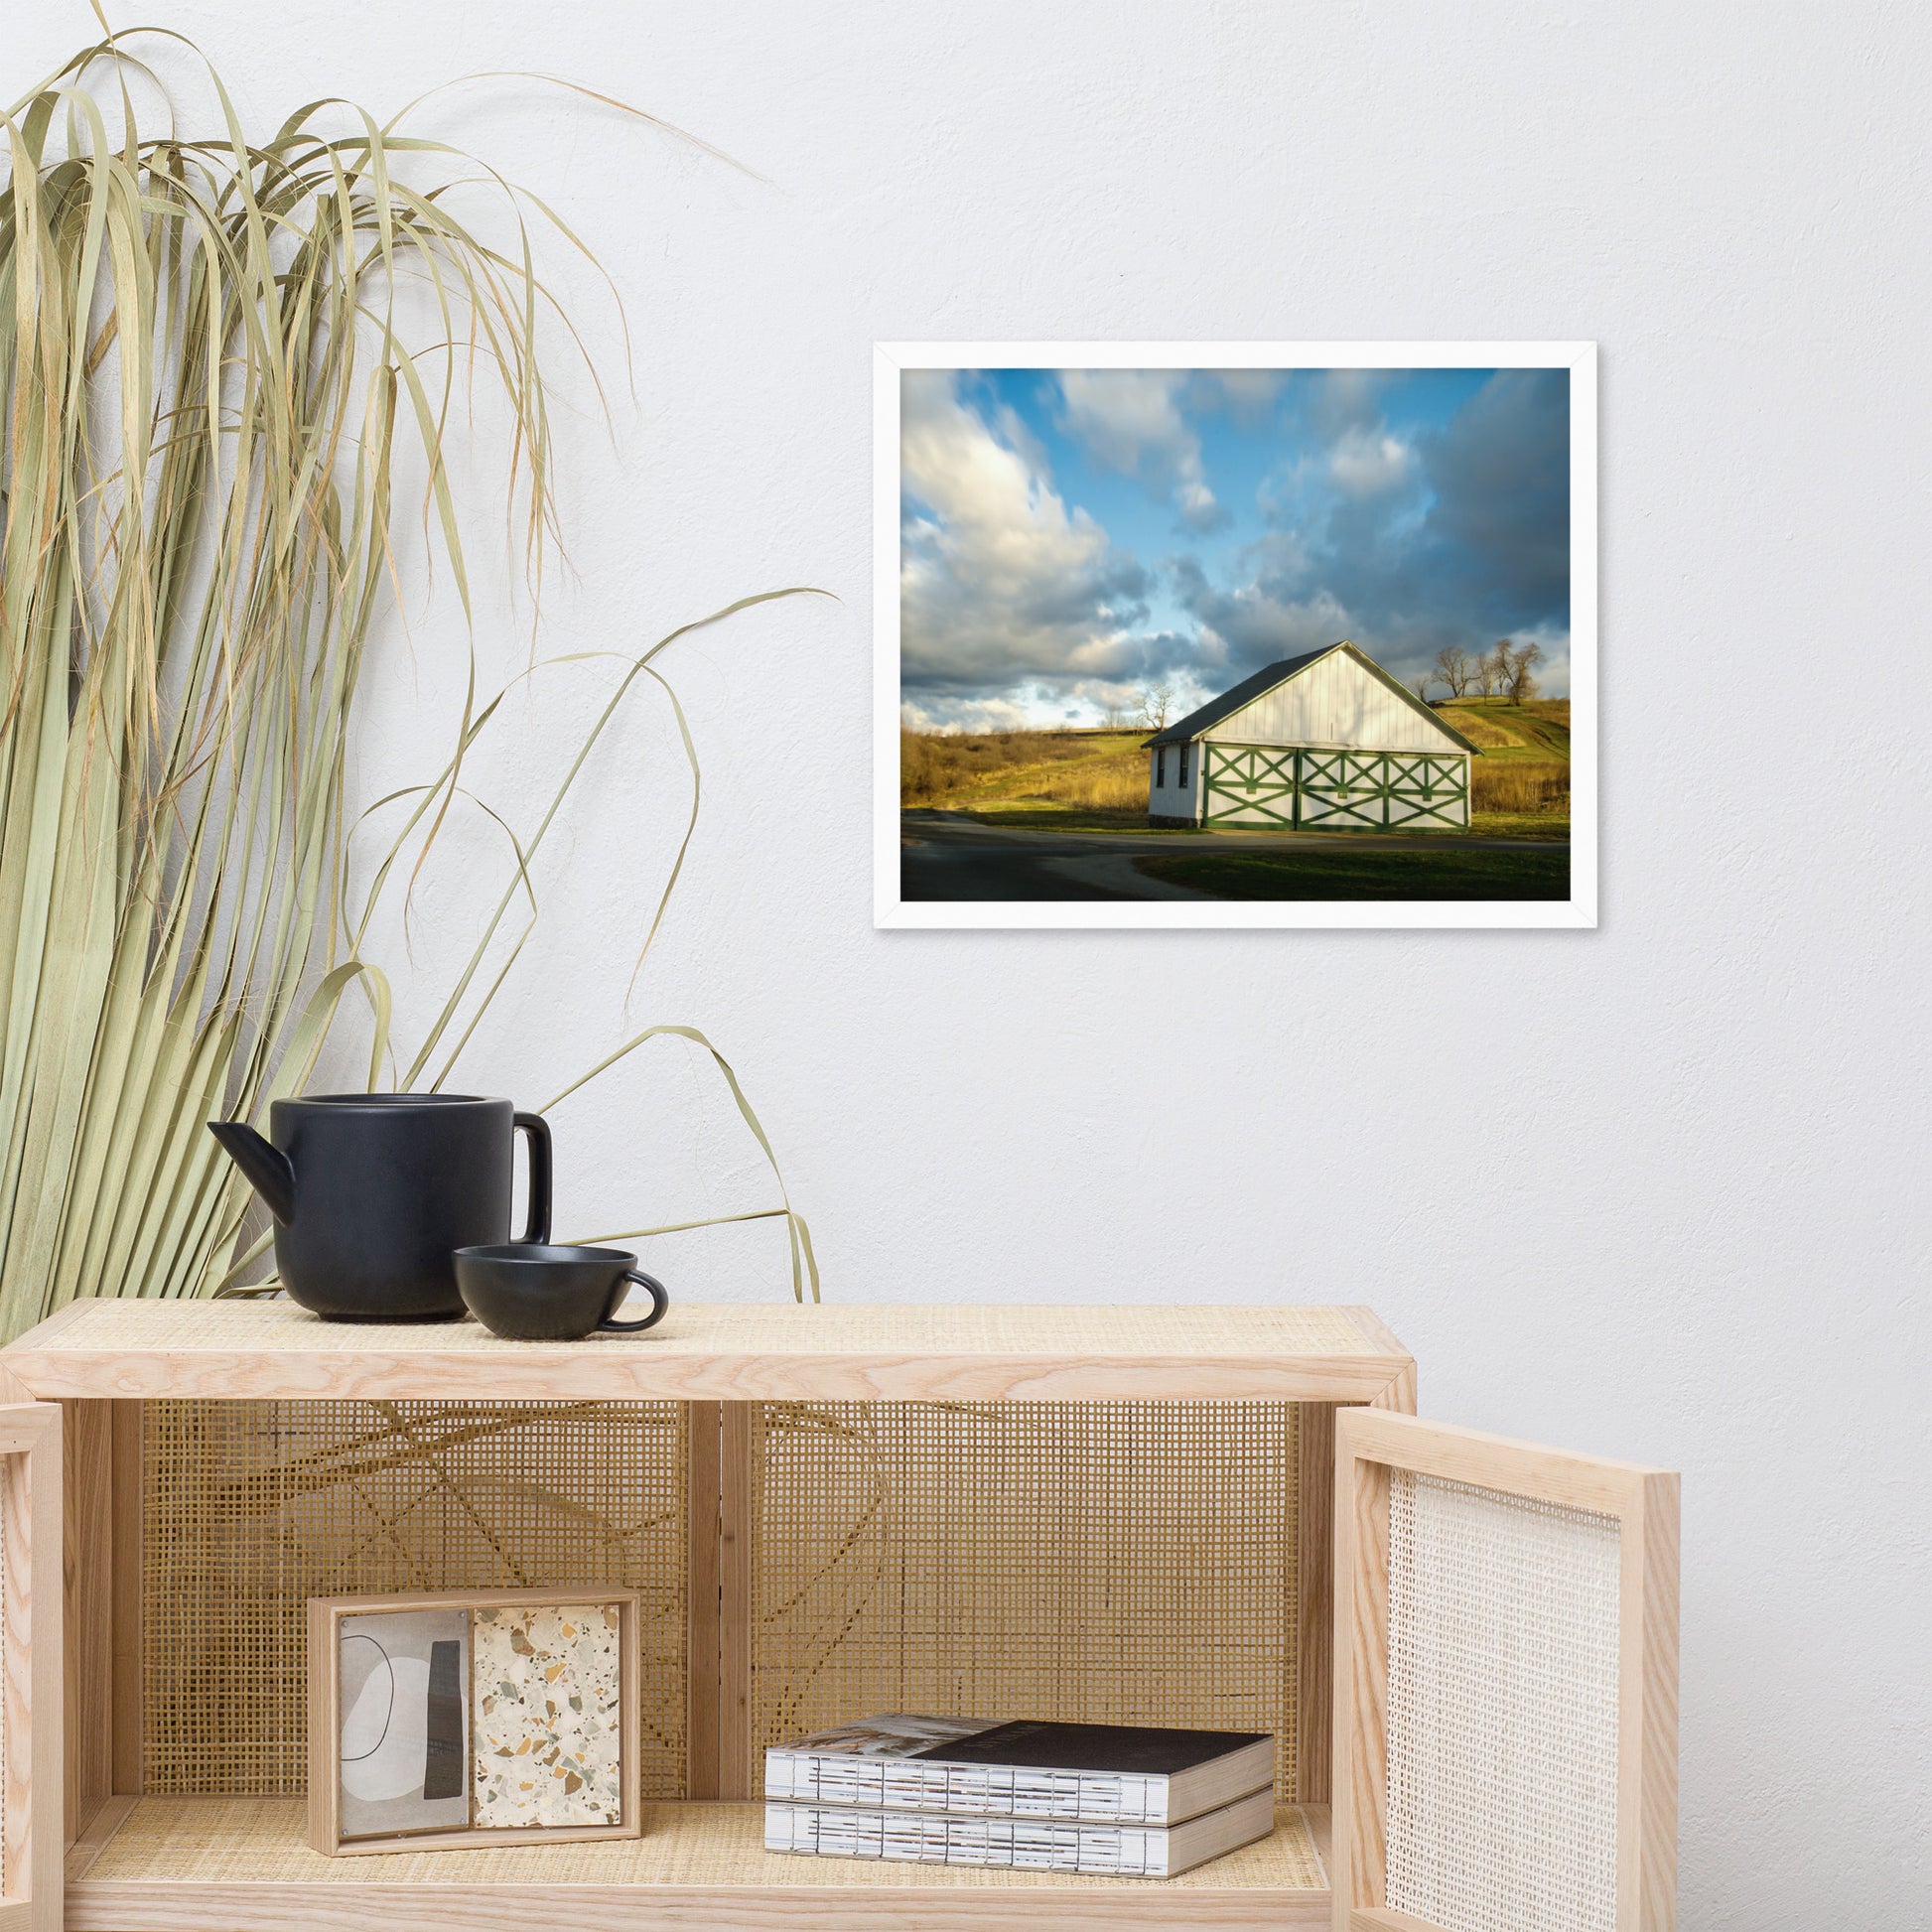 Simple Above Bed Decor: Aging Barn in the Morning Sun - Rural / Country Style Landscape / Nature Photograph  Framed Wall Art Print - Wall Decor - Artwork